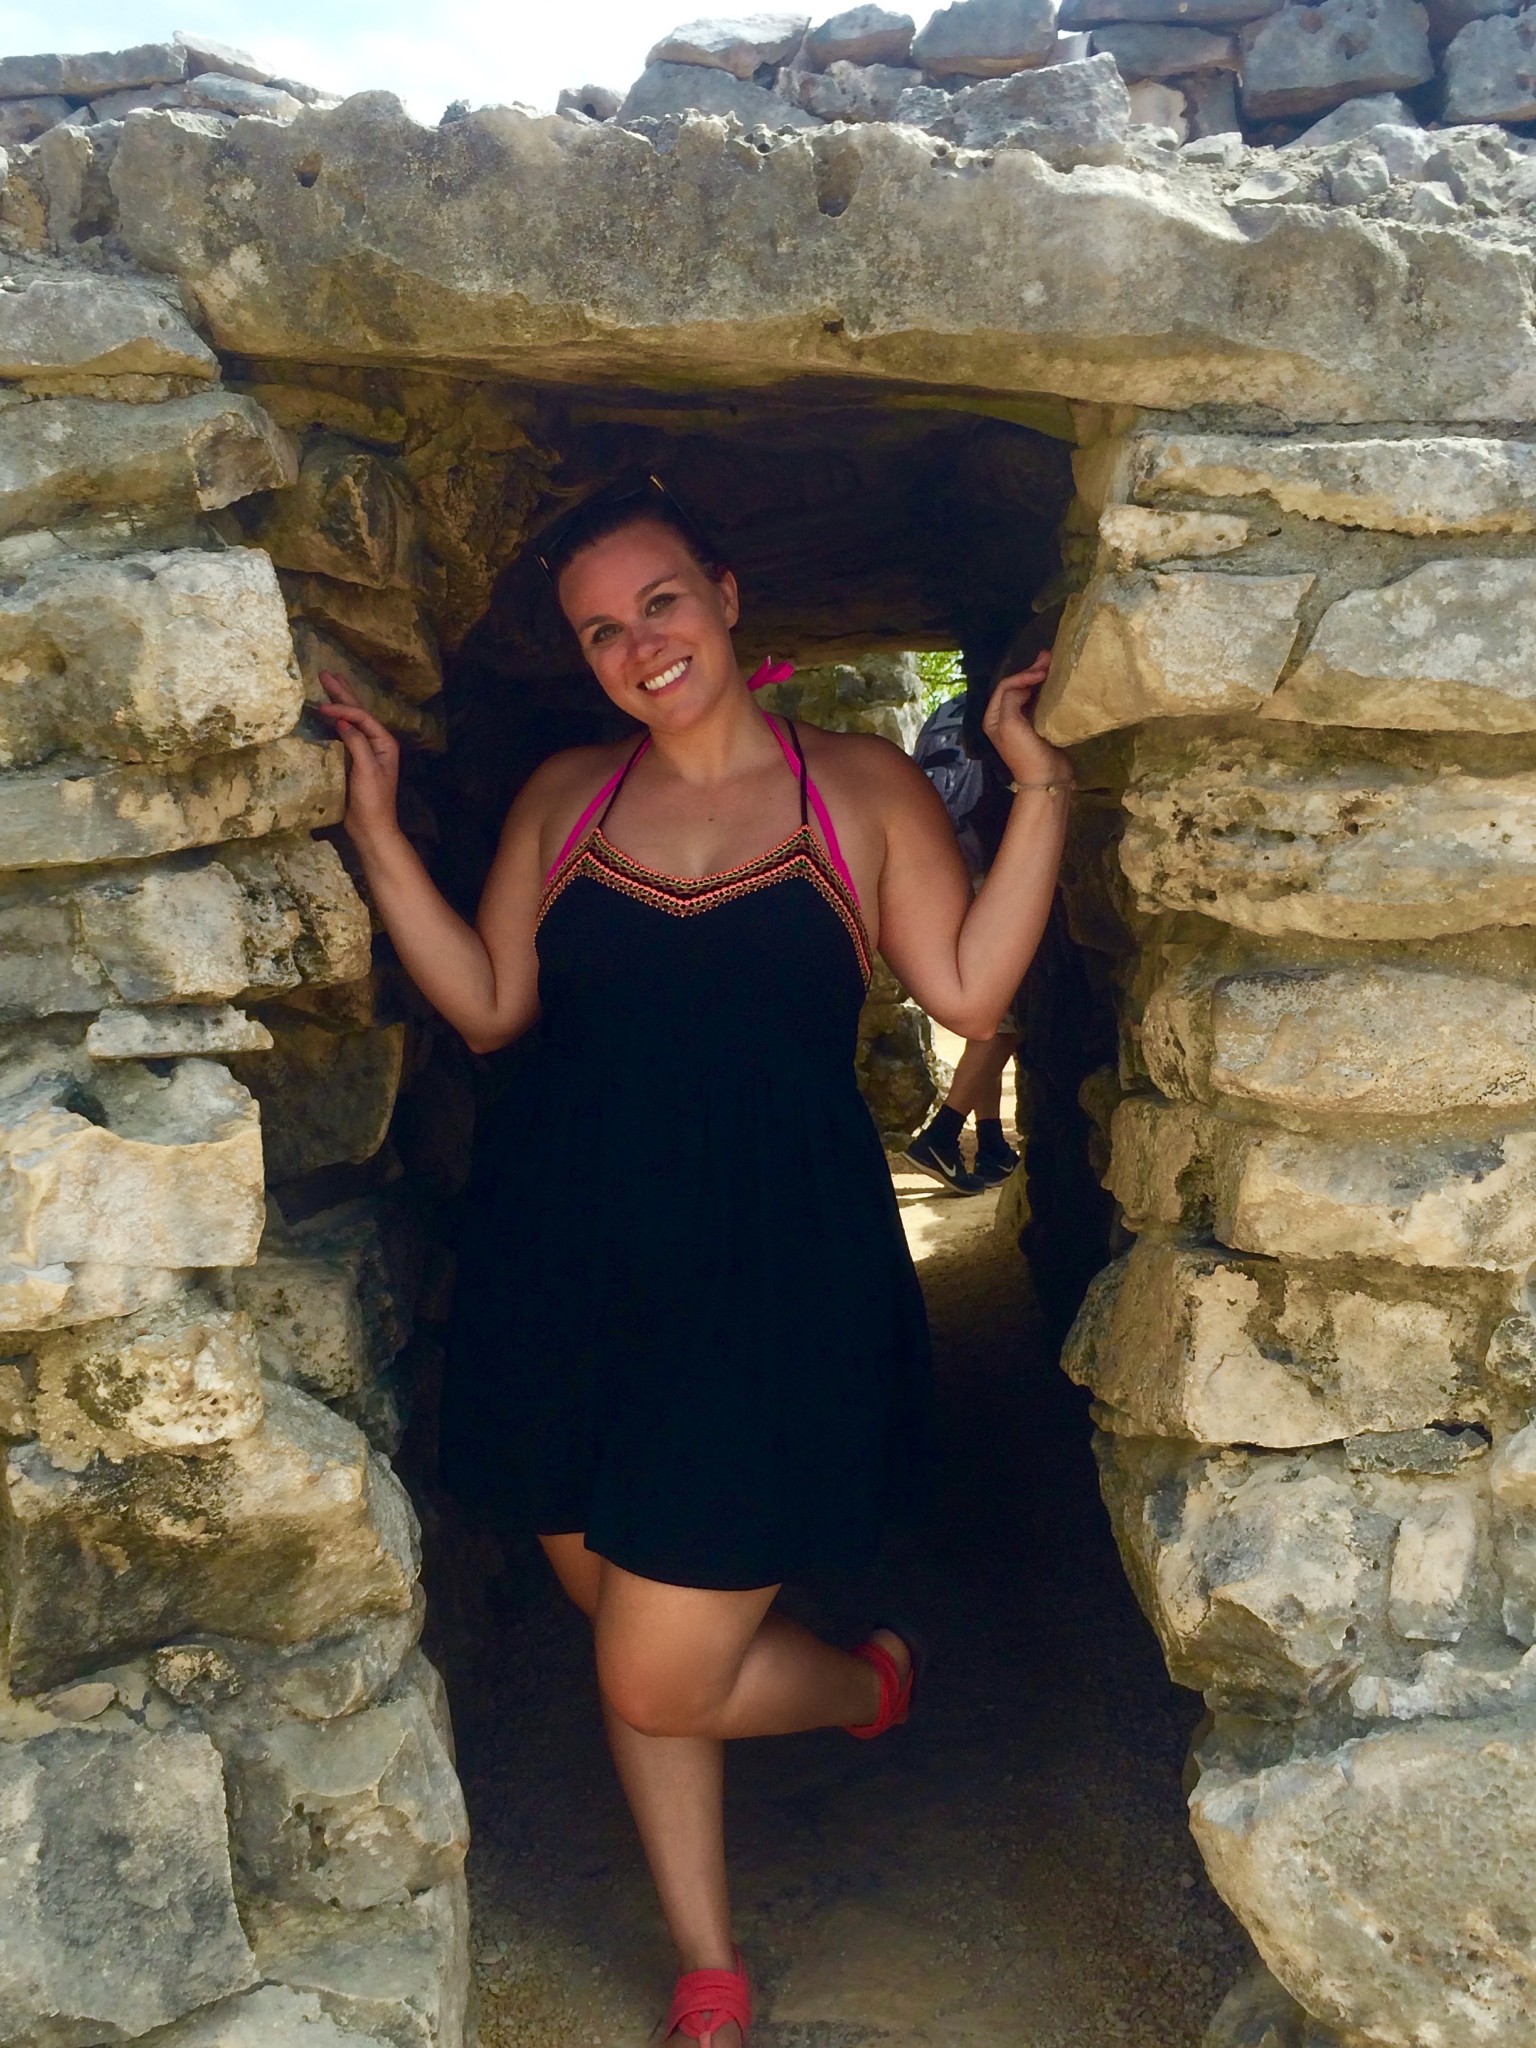 What to do in Playa Del Carmen, Mexico - Visiting Ruins